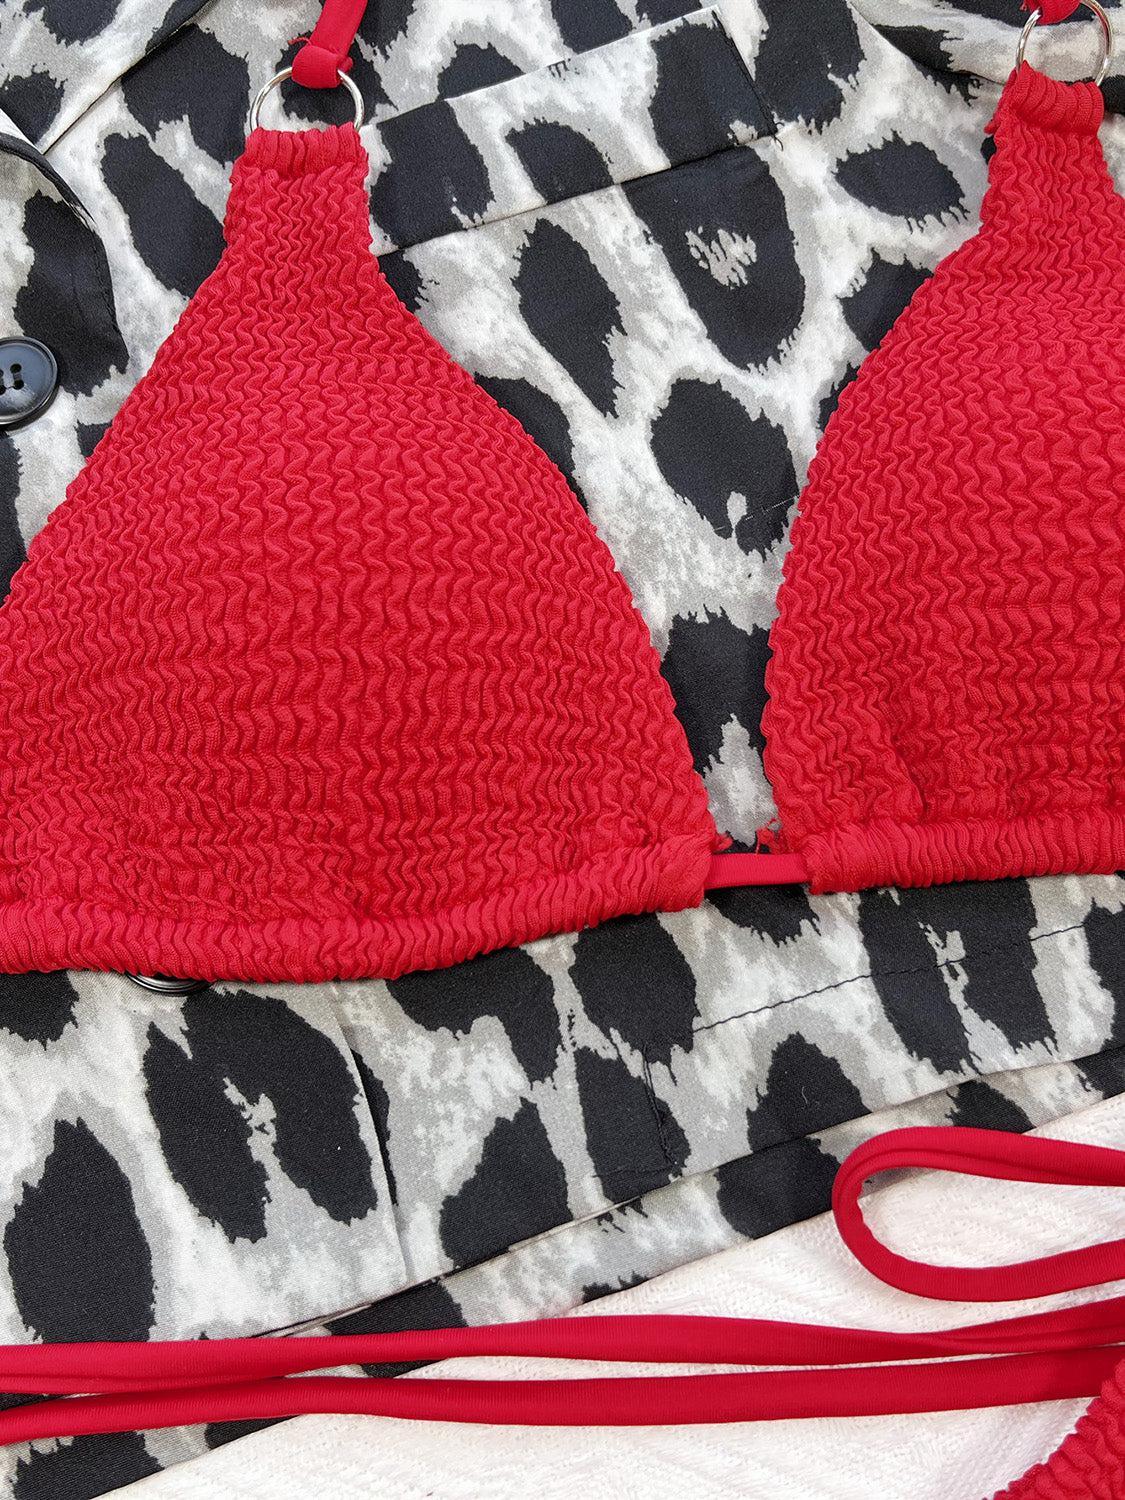 a red bikini top laying on top of a black and white pattern